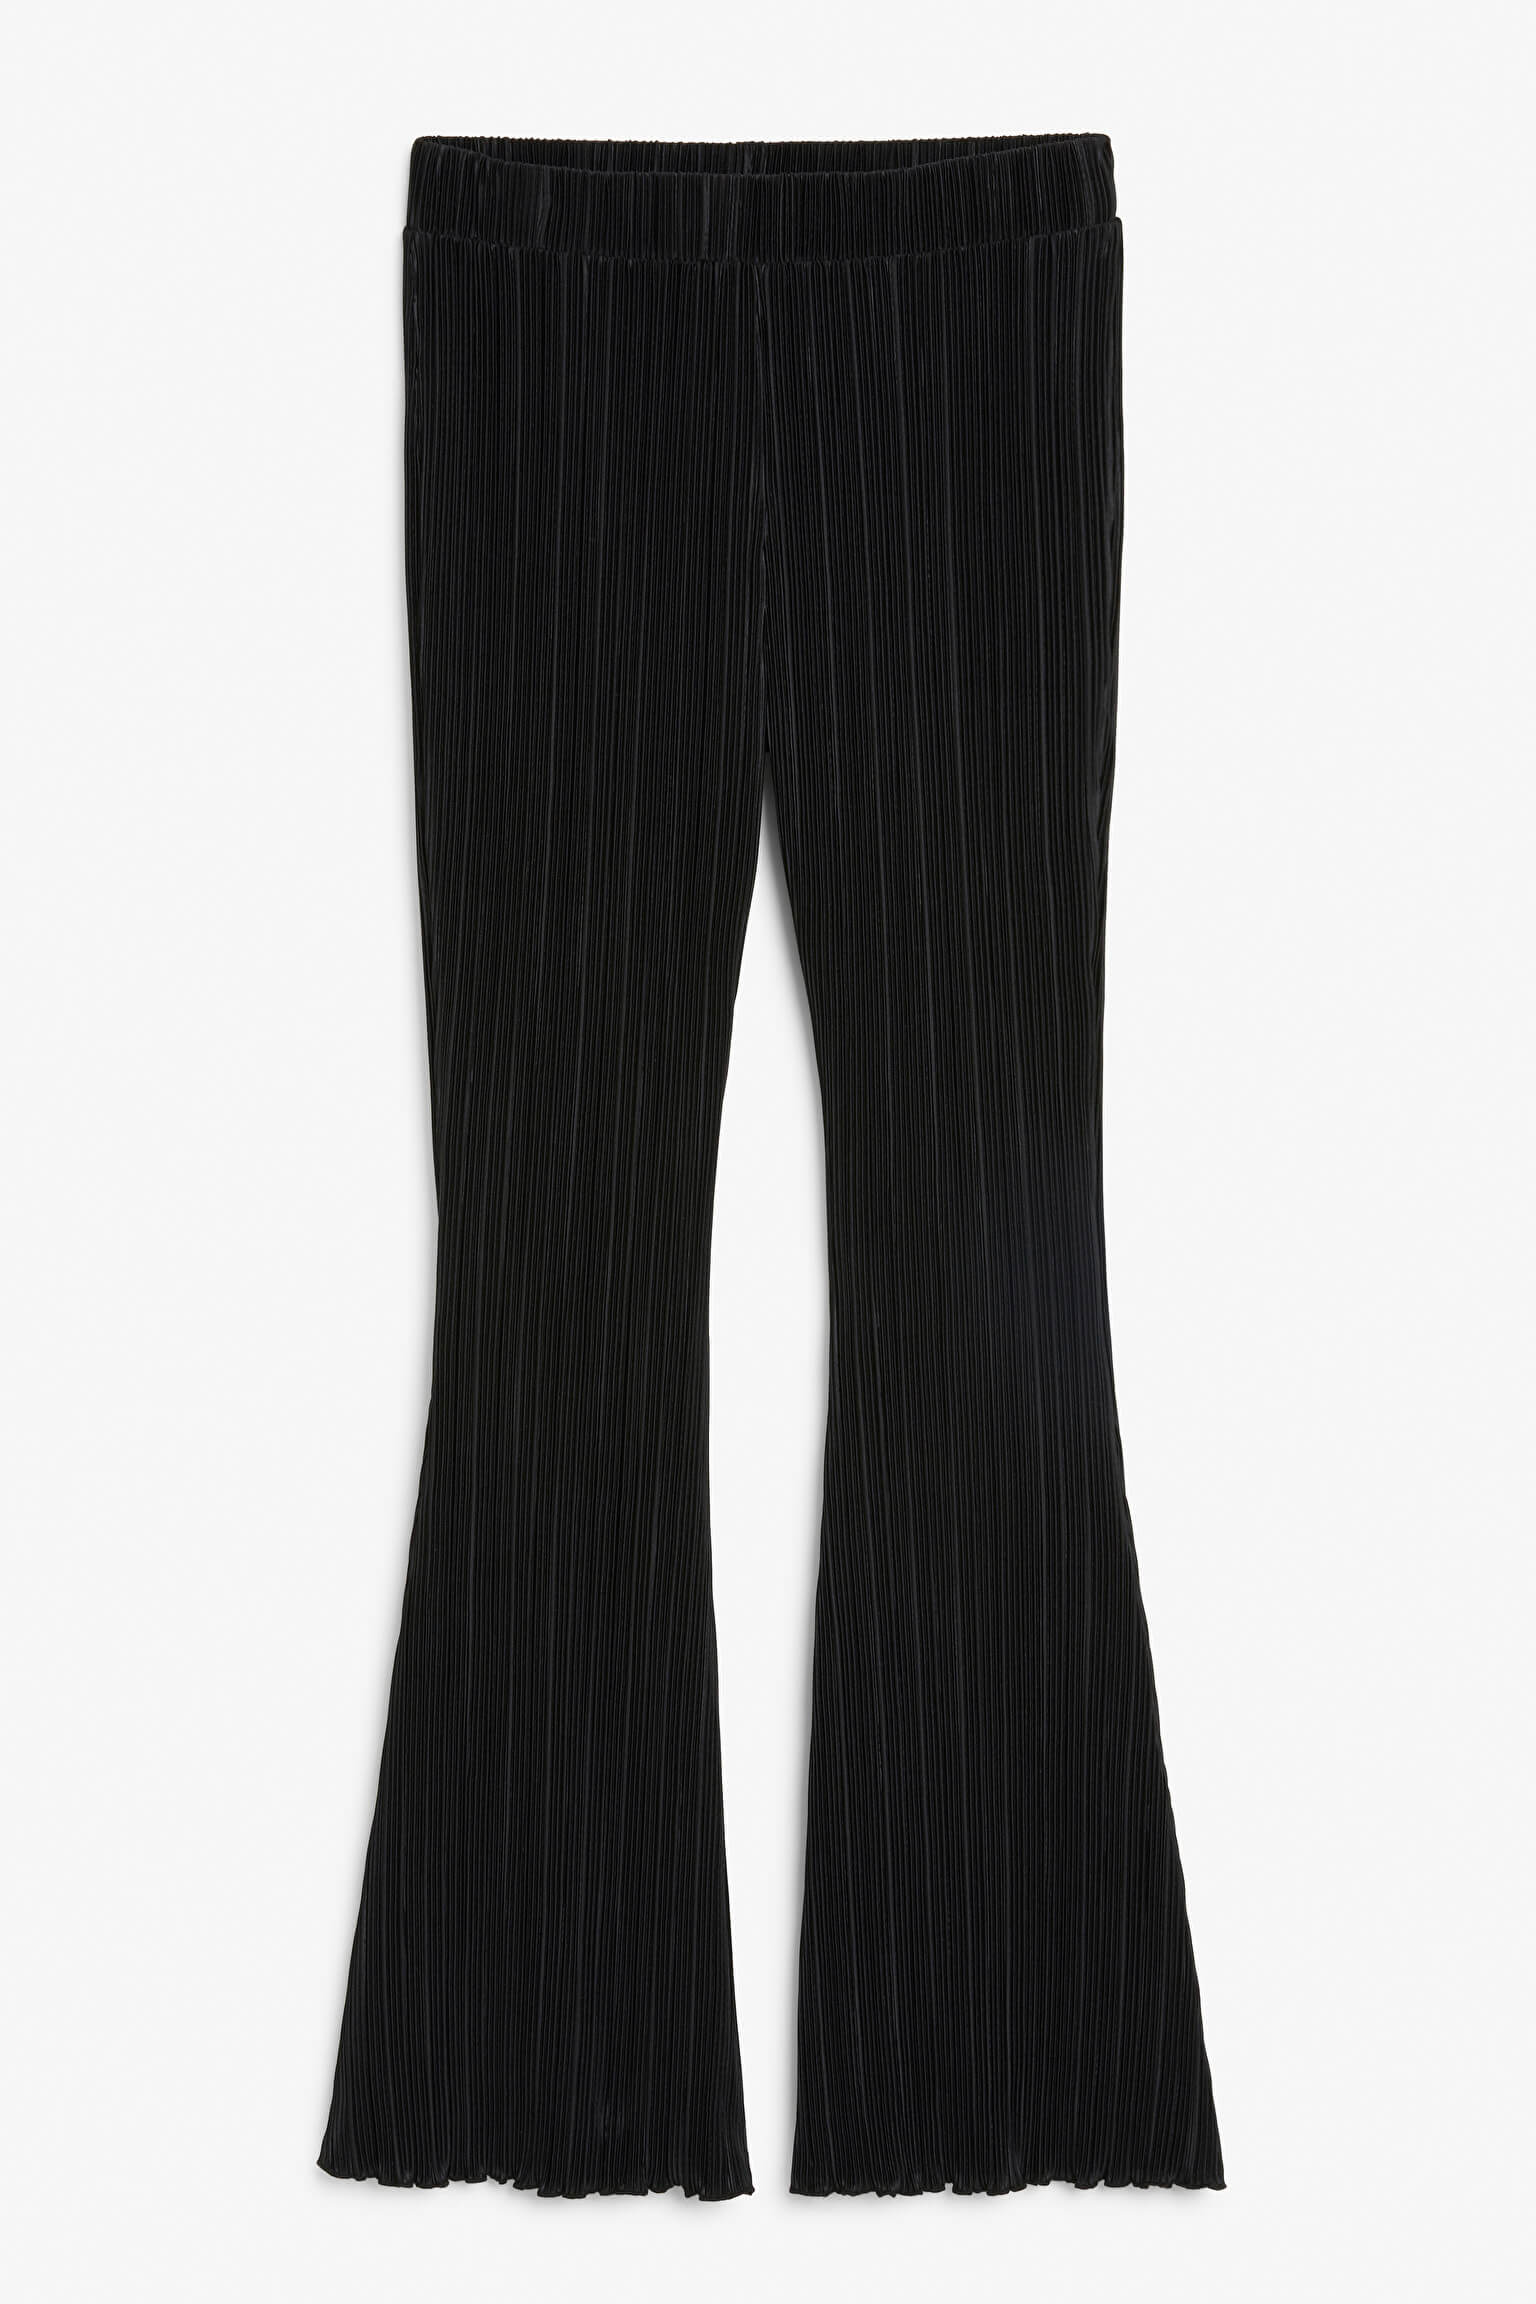 Black pleated trousers from Monki